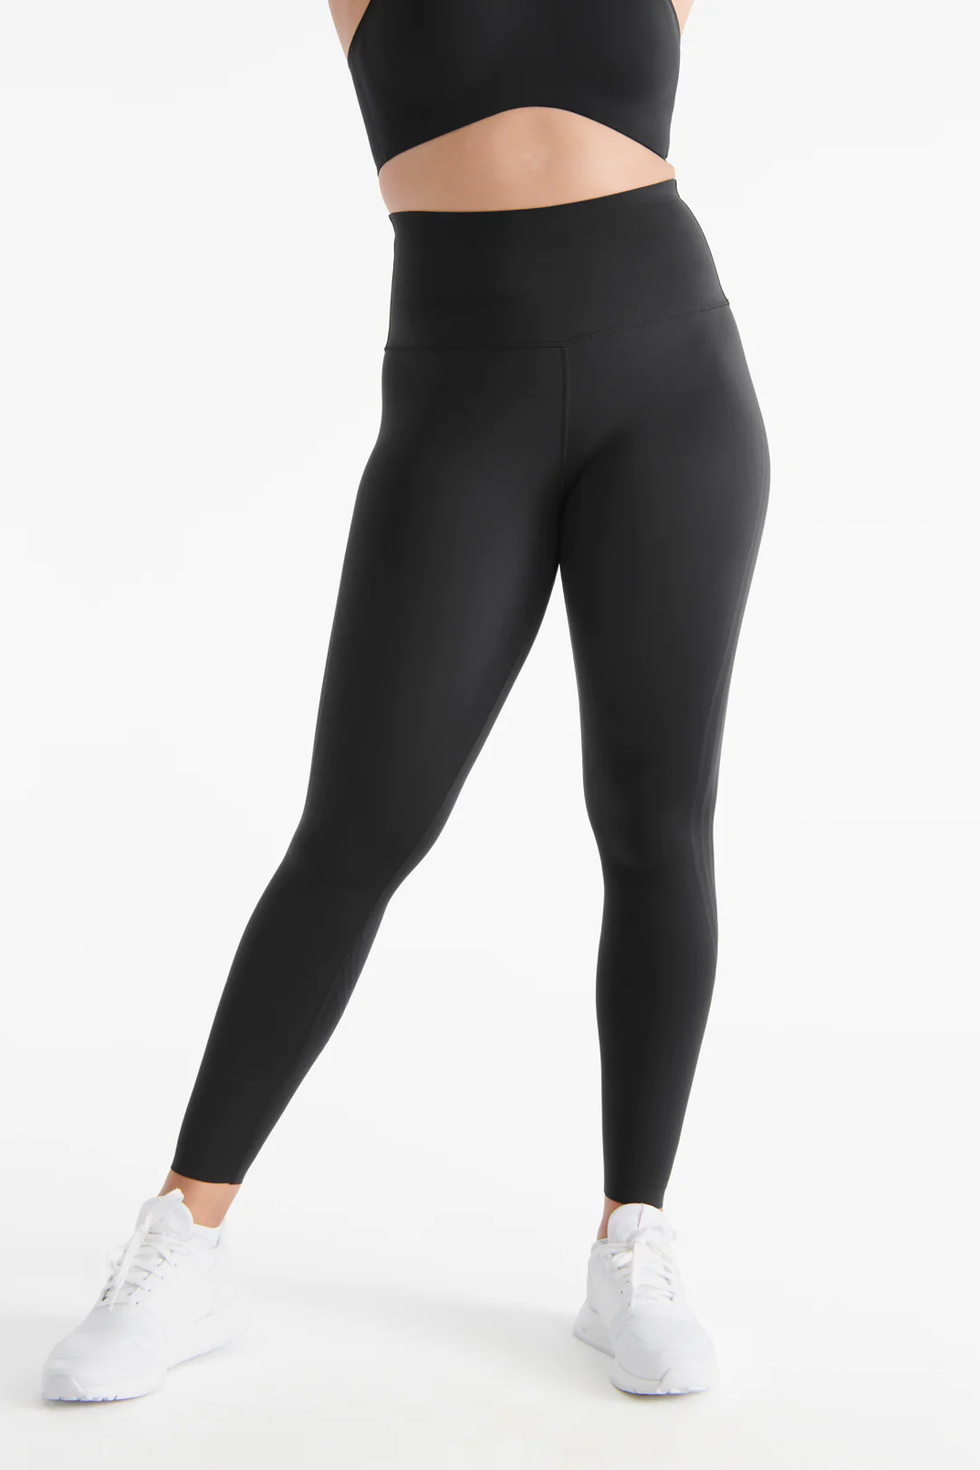 The Most Common high waisted leggings Debate Isn't as Black and